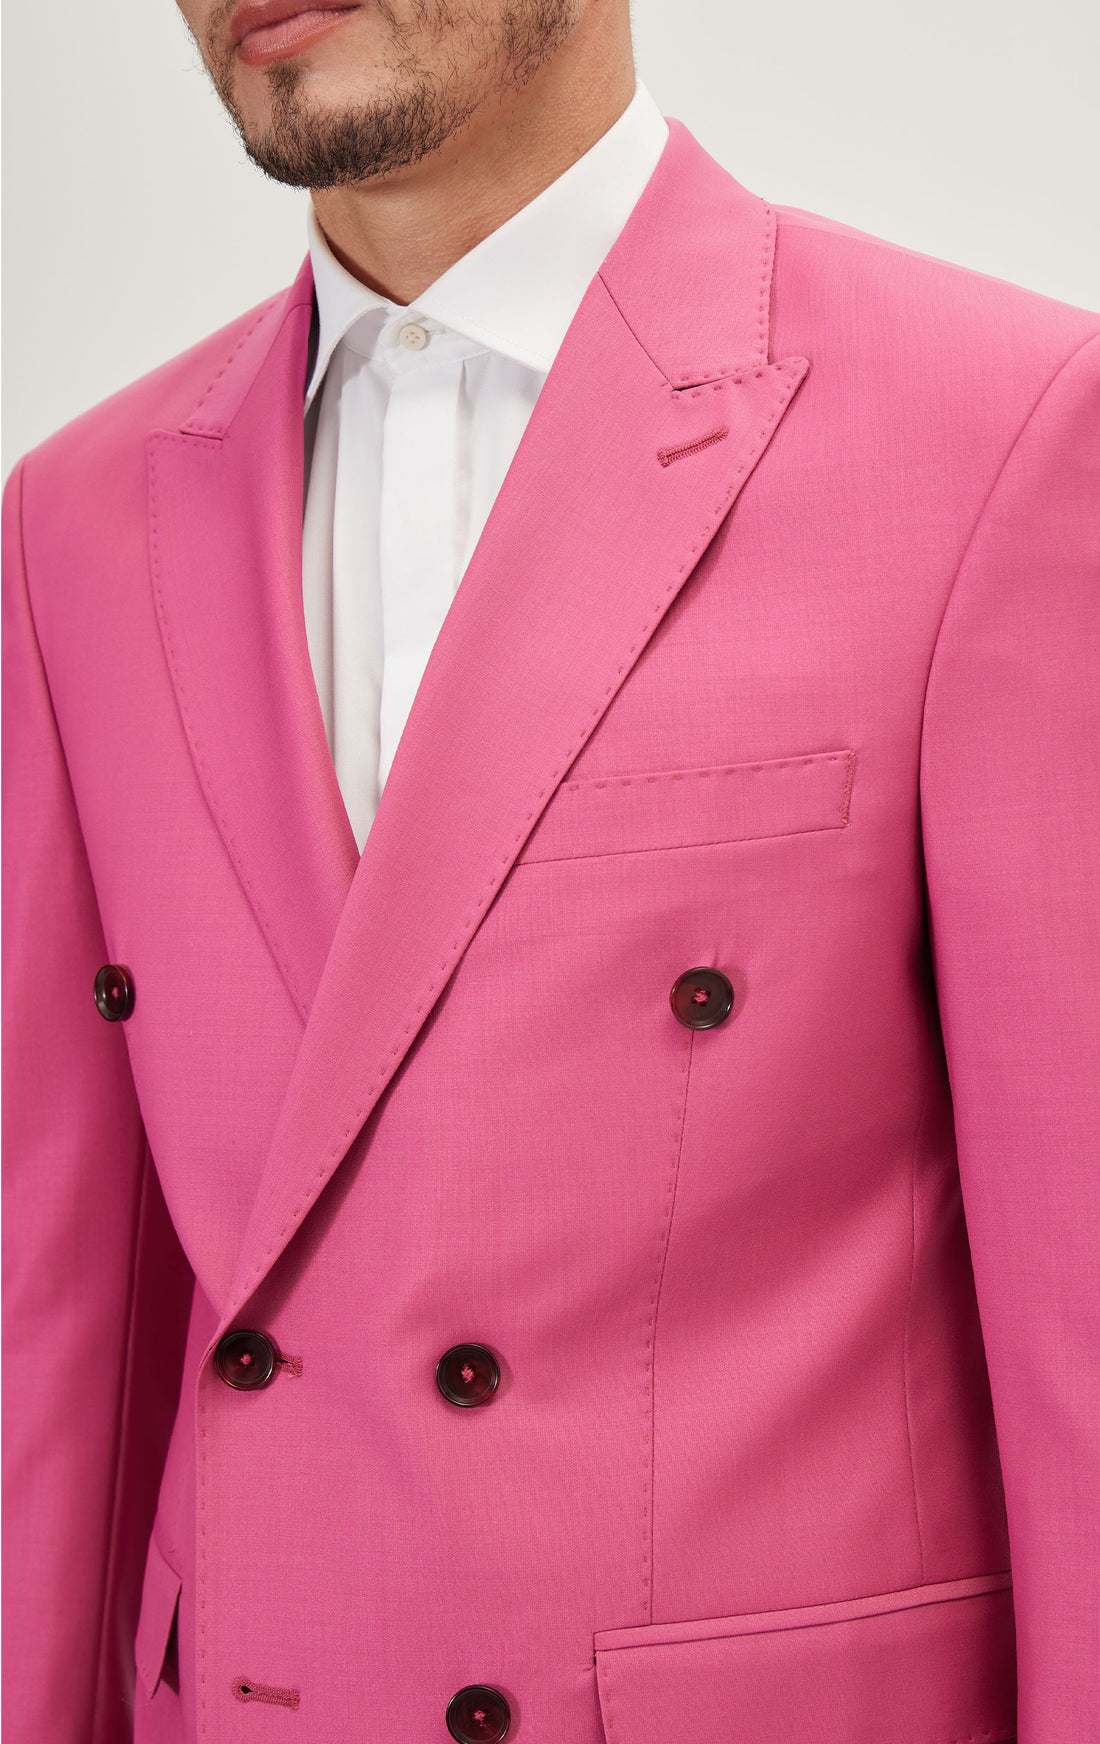 Super 120S Merino Wool Double Breasted Suit - Raspberry Pink Ish Red